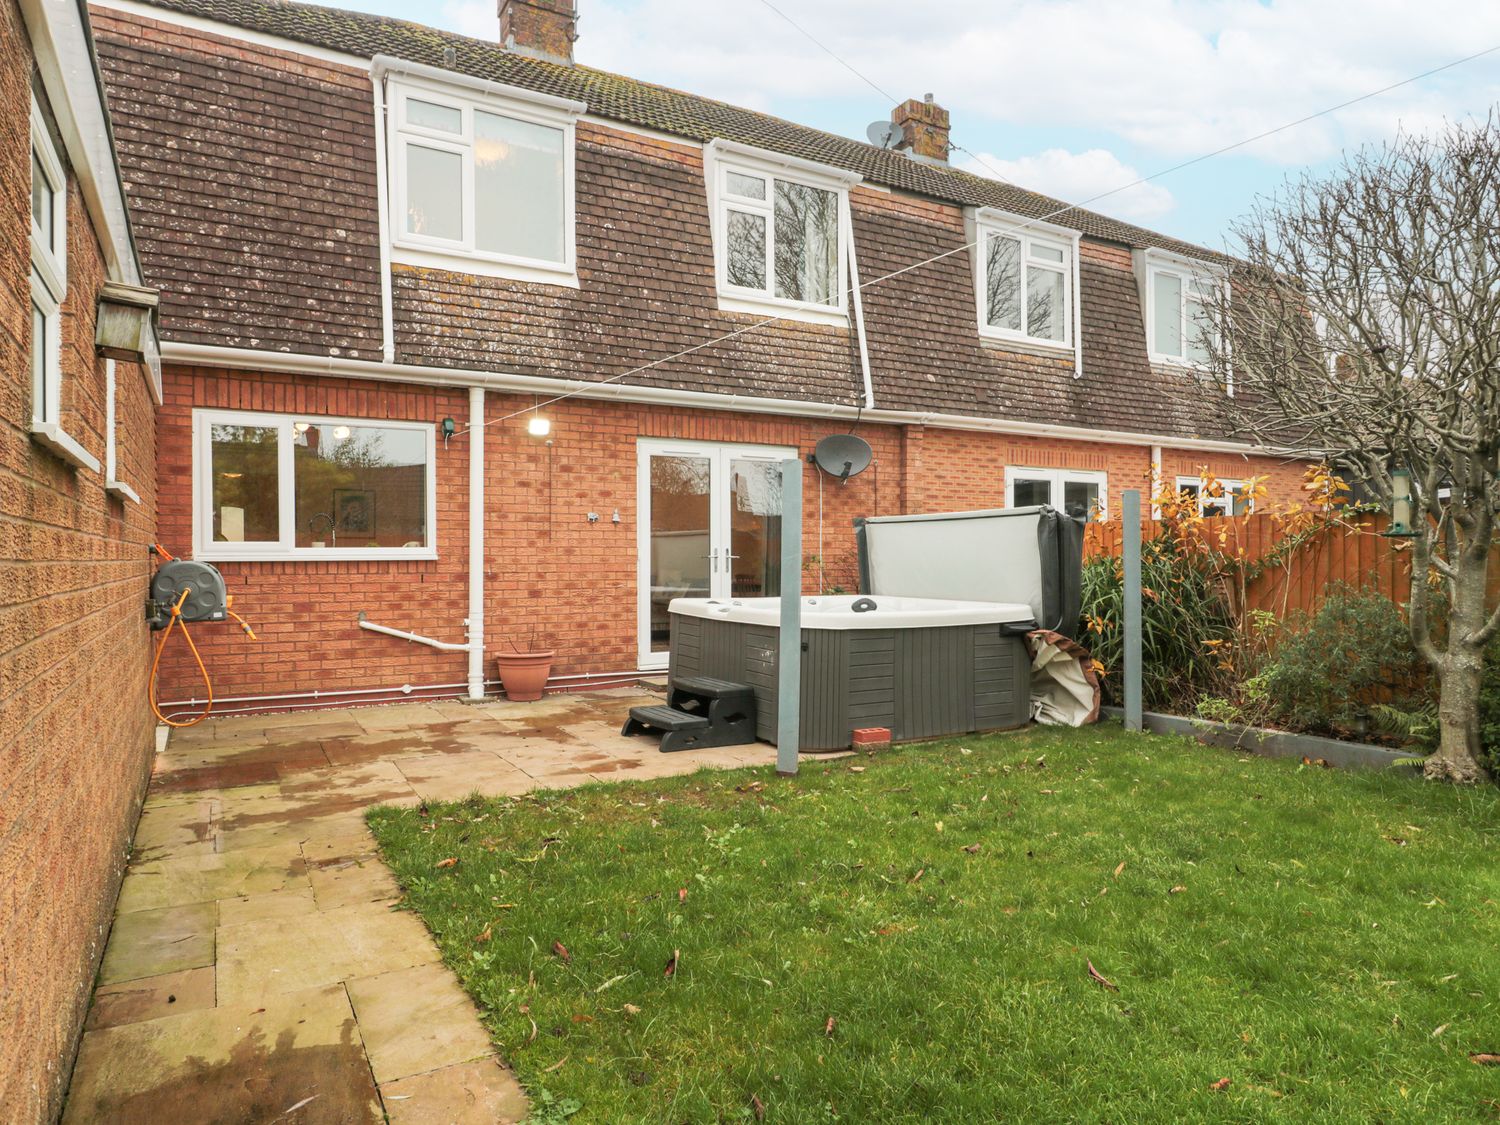 24 Severn Road, Portishead, Somerset. Enclosed patio garden with furniture and hot tub. TV and WiFi.